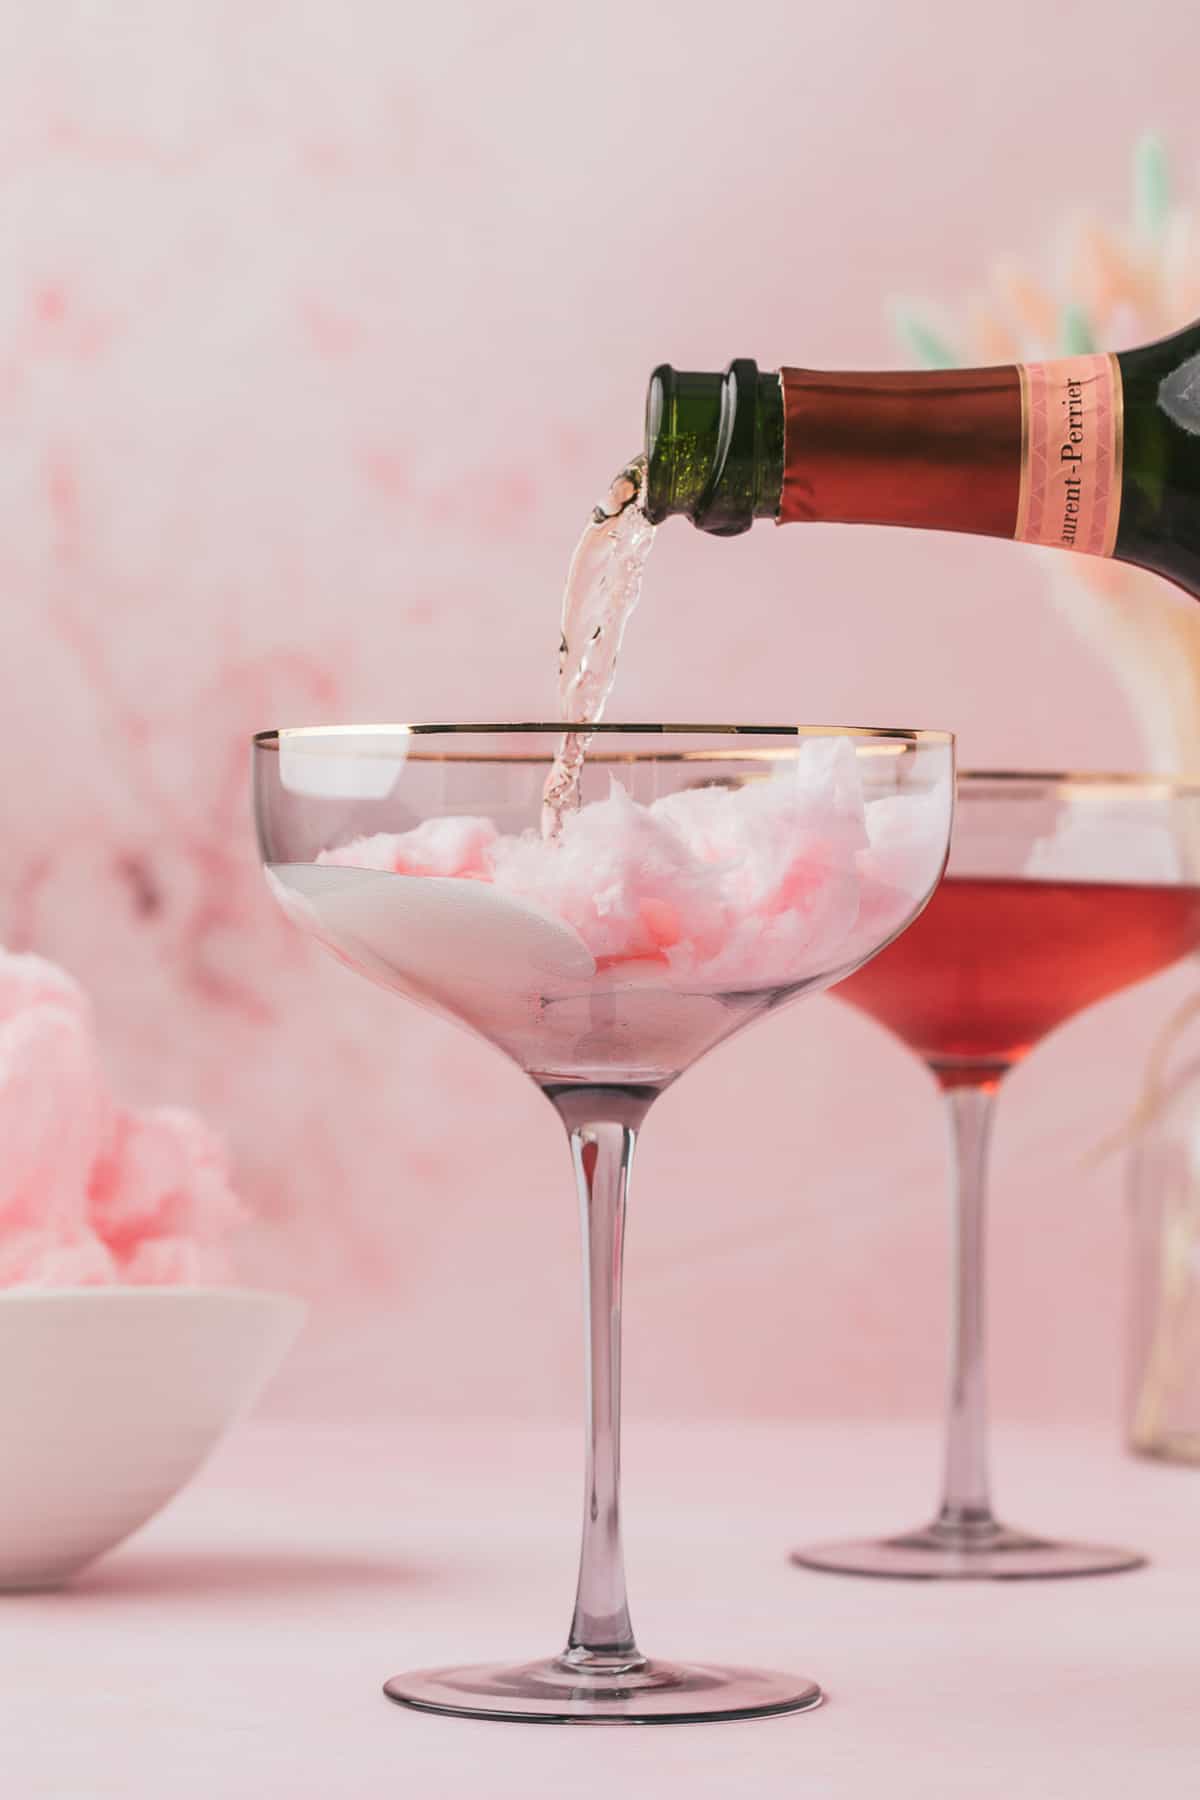 Champagne being poured over cotton candy in a glass.